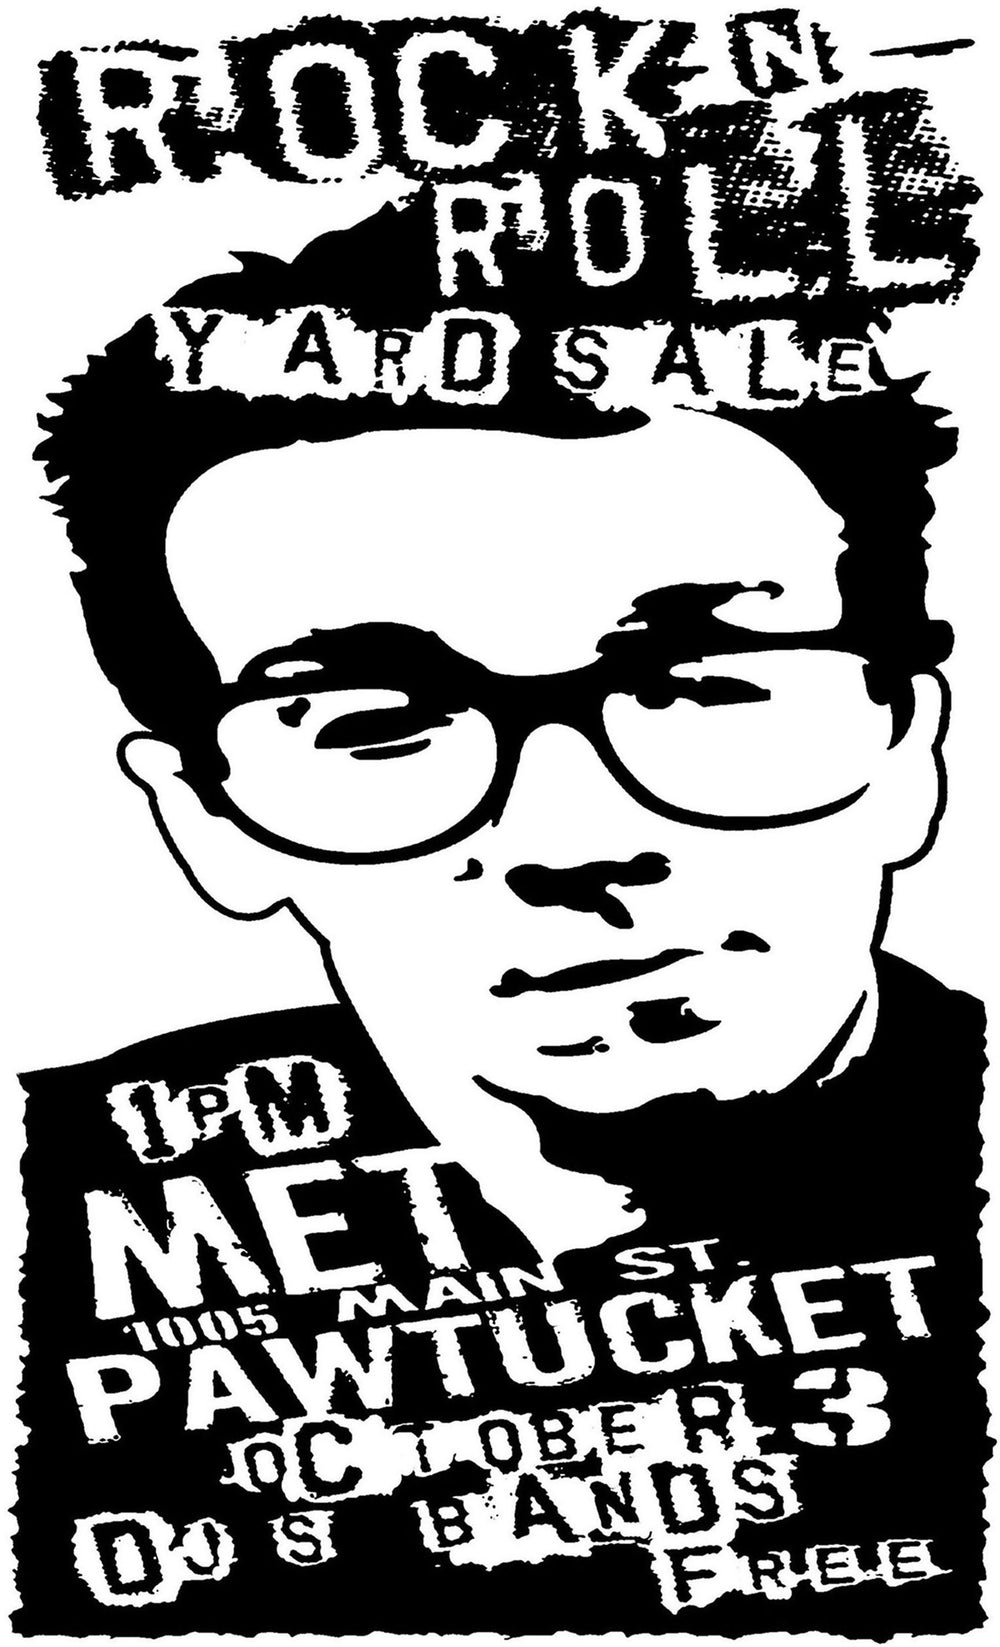 Rock & Roll Yard Sale This Sunday At The Met